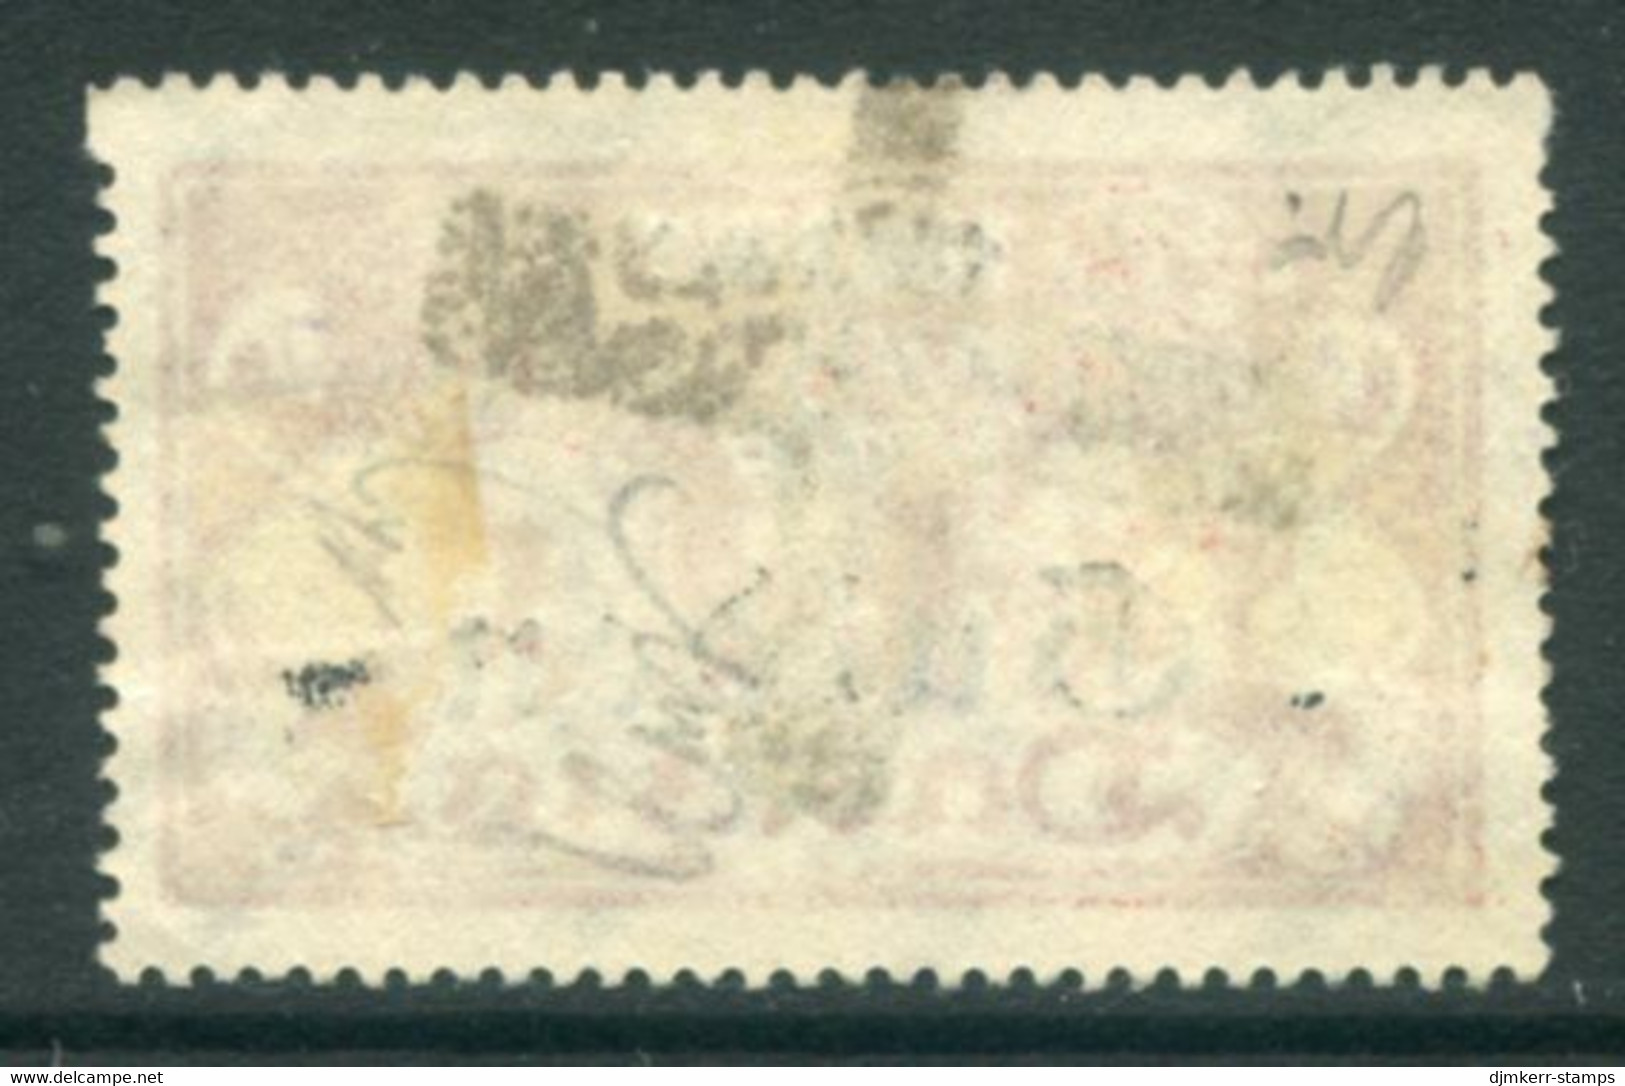 DANZIG 1923 Arms Definitive 3 G. On 1 Mio. Mk. Postally Used With Parcel Cancel.  Michel 191 - Gebraucht